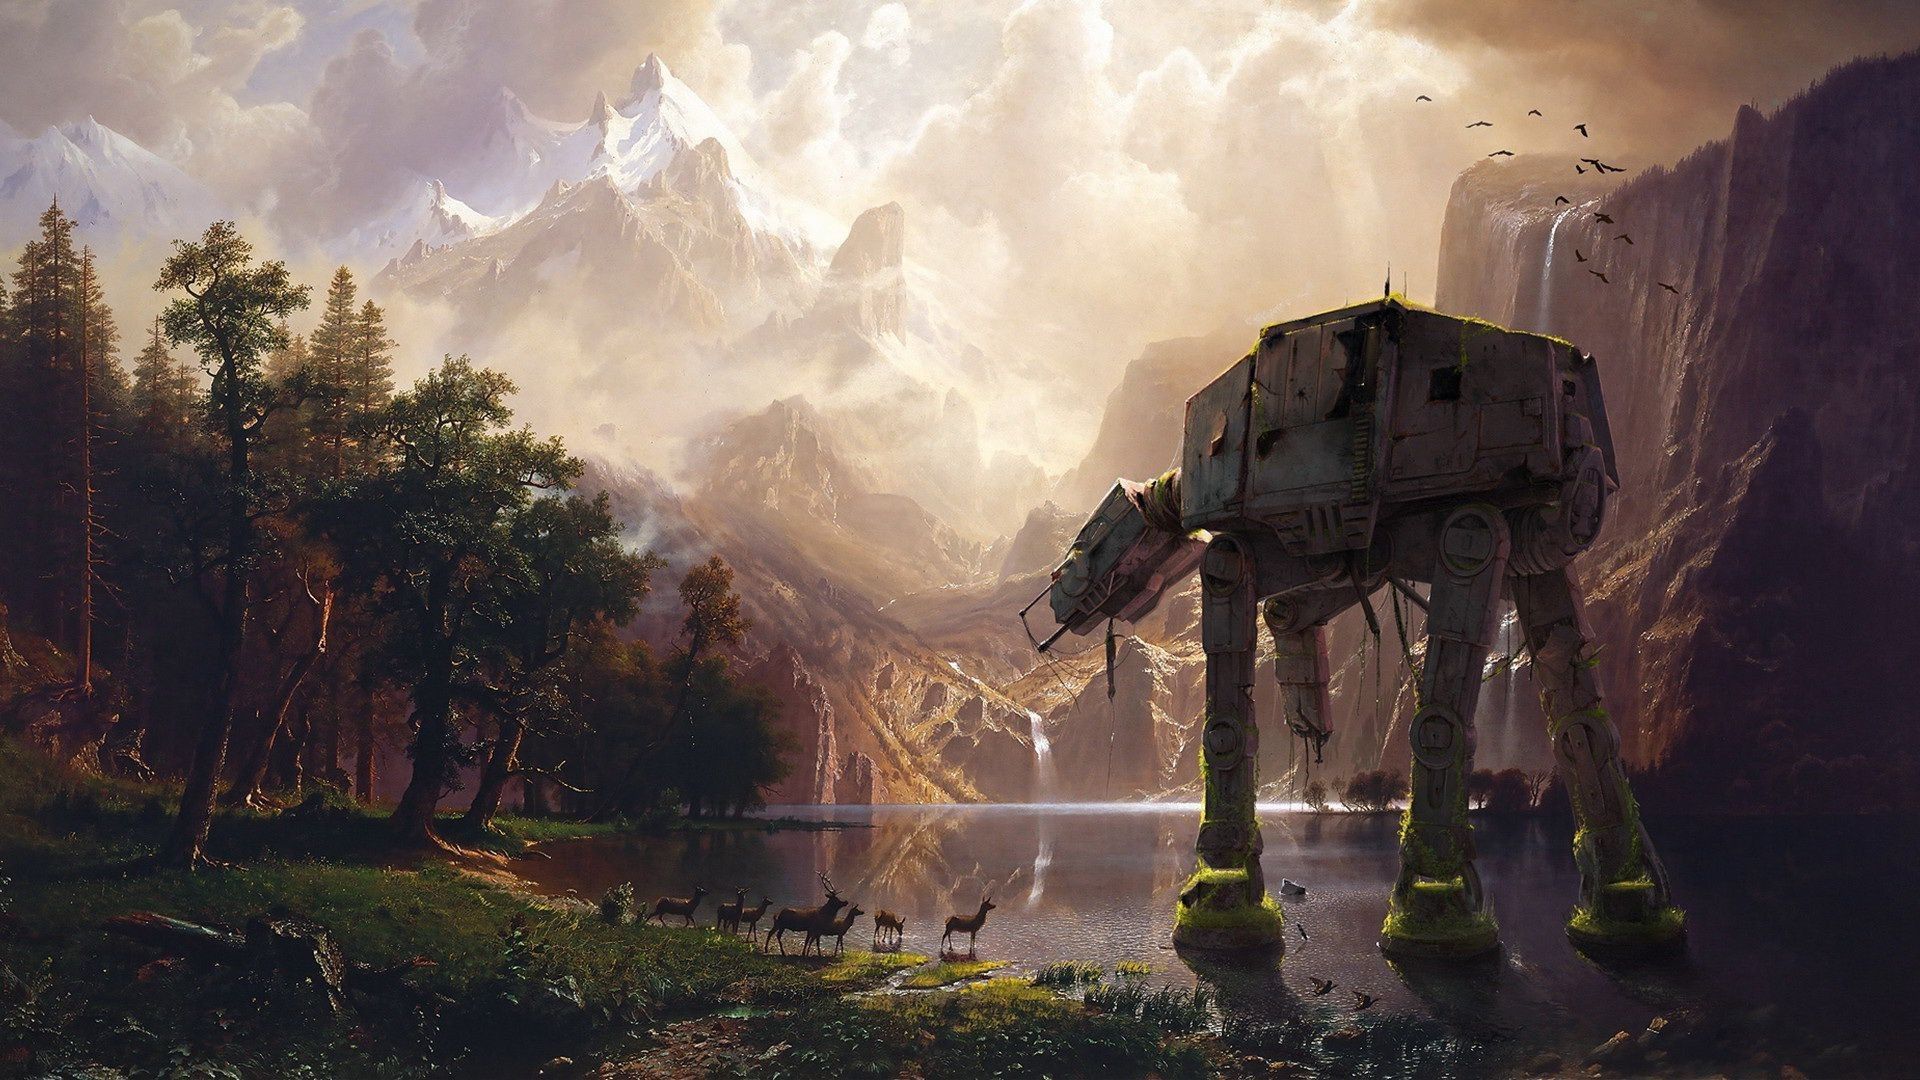 Can anyone tell me if this image is anywhere in canon? I like the image a lot but I can't figu. Beaux fonds d'écran, Affiche star wars, Illustrations de star wars